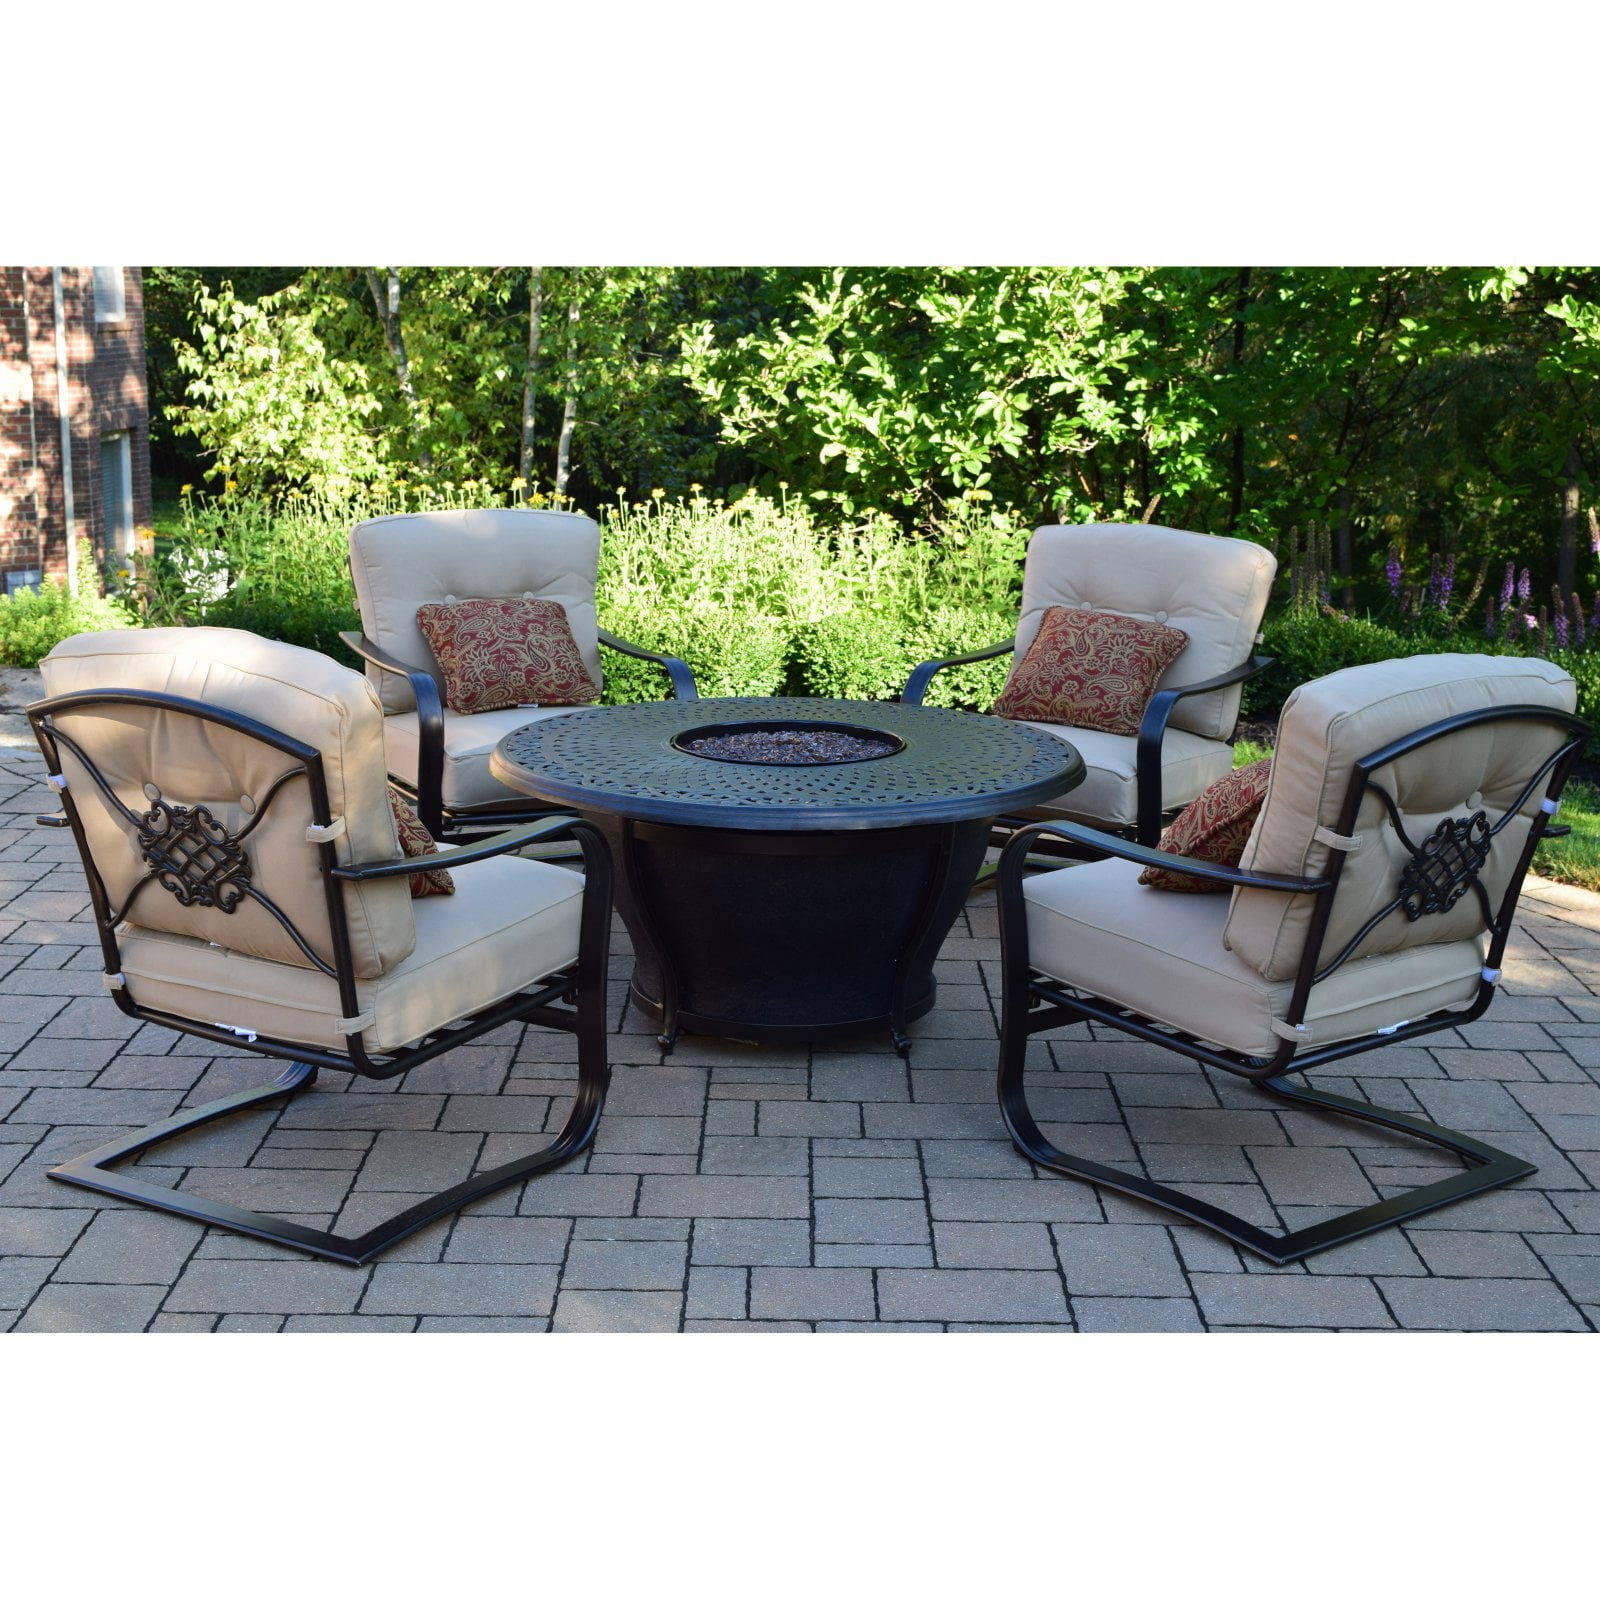 Living Accents Fire Pit Chat Set : Great Low Price On Outdoor Furniture